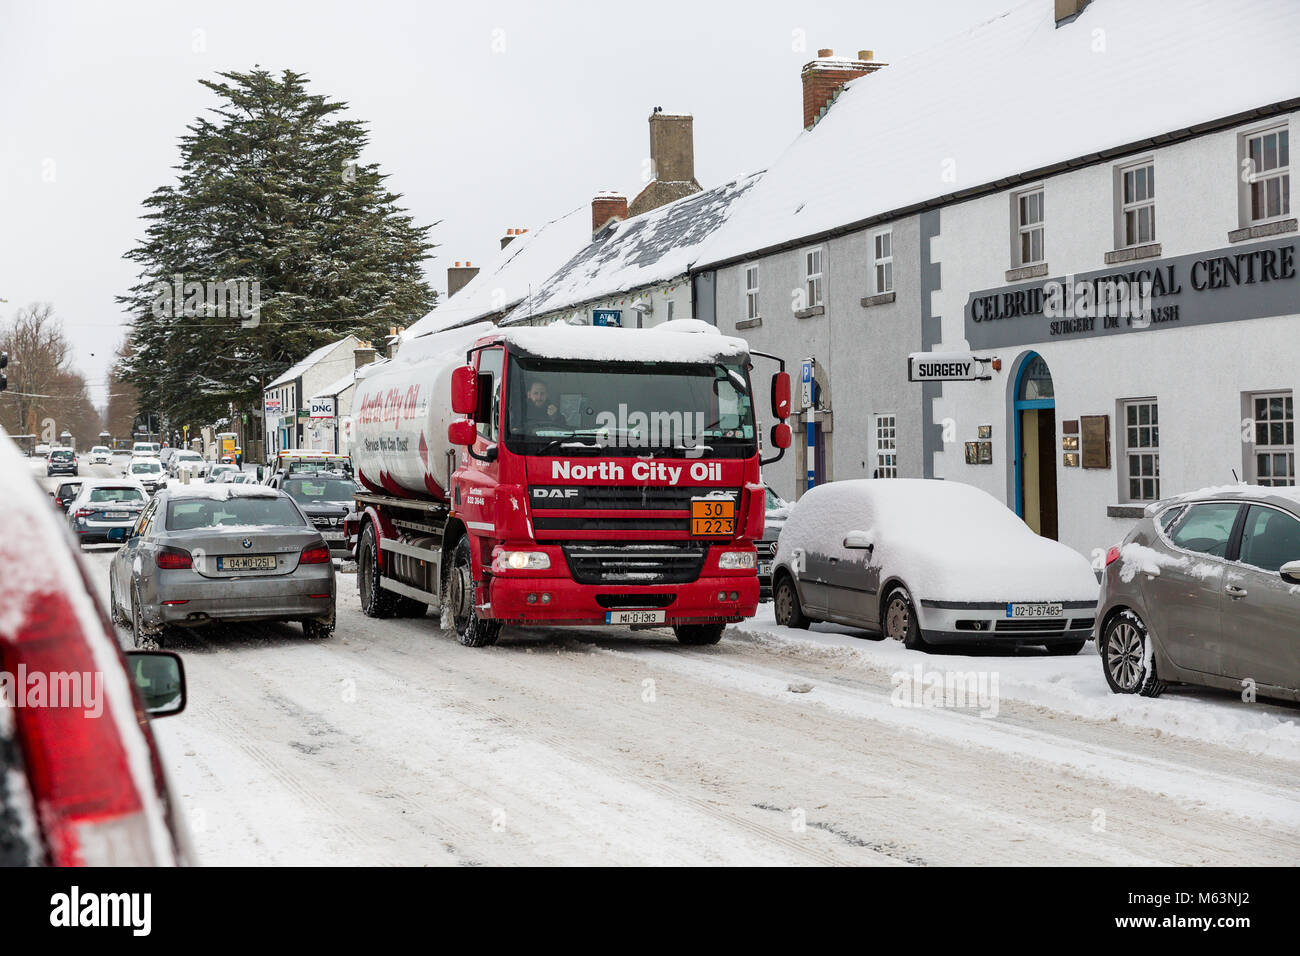 Celbridge, Kildare, Ireland. 28 Feb 2018:  Home Heating Oil Delivery Lorry on main street in Celbridge. Red weather alert. Ireland weather. Beast from the east hits Irish towns. Heavy snow fall in Celbridge. Snow and ice covering roads around Irish towns making driving conditions difficult. Stock Photo